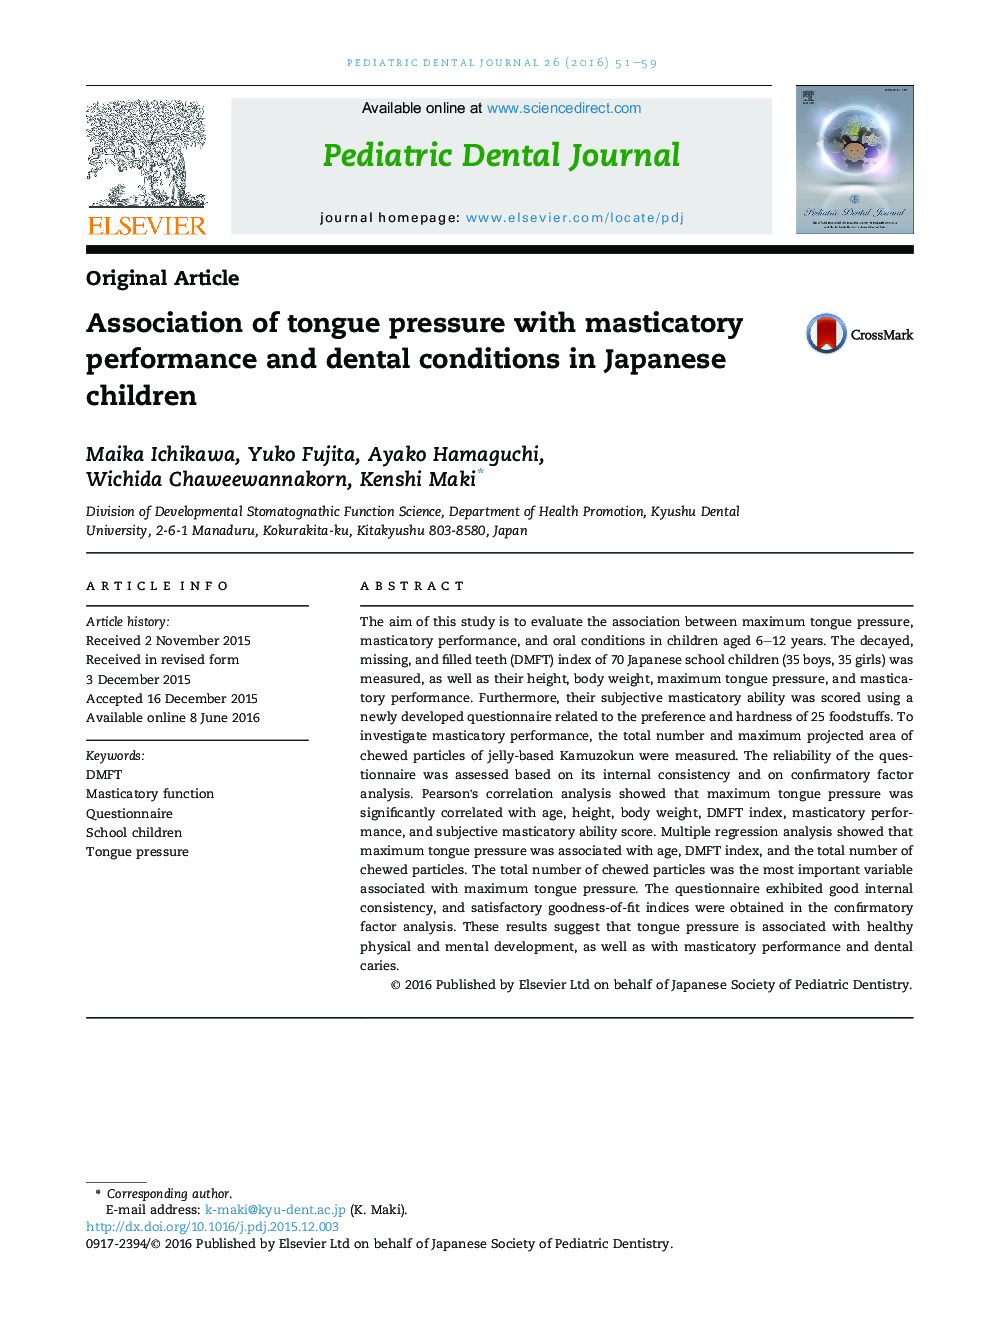 Association of tongue pressure with masticatory performance and dental conditions in Japanese children